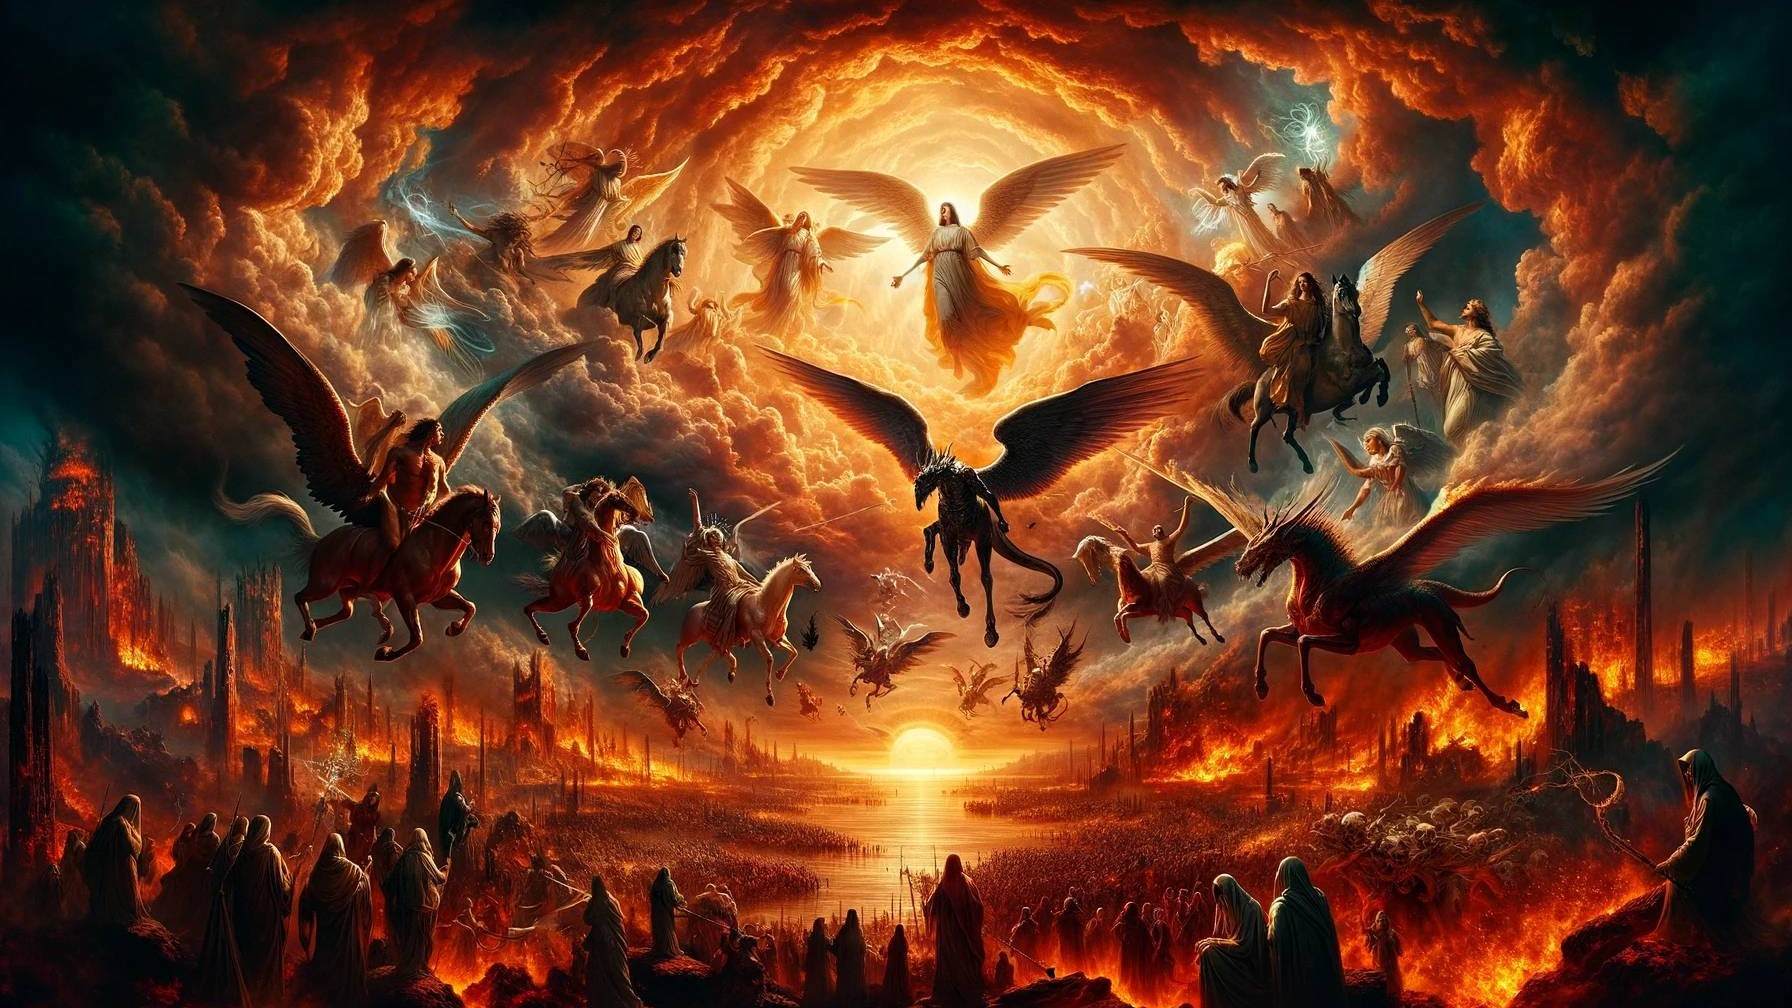 What Are The Three Main Themes Of The Book Of Revelation?